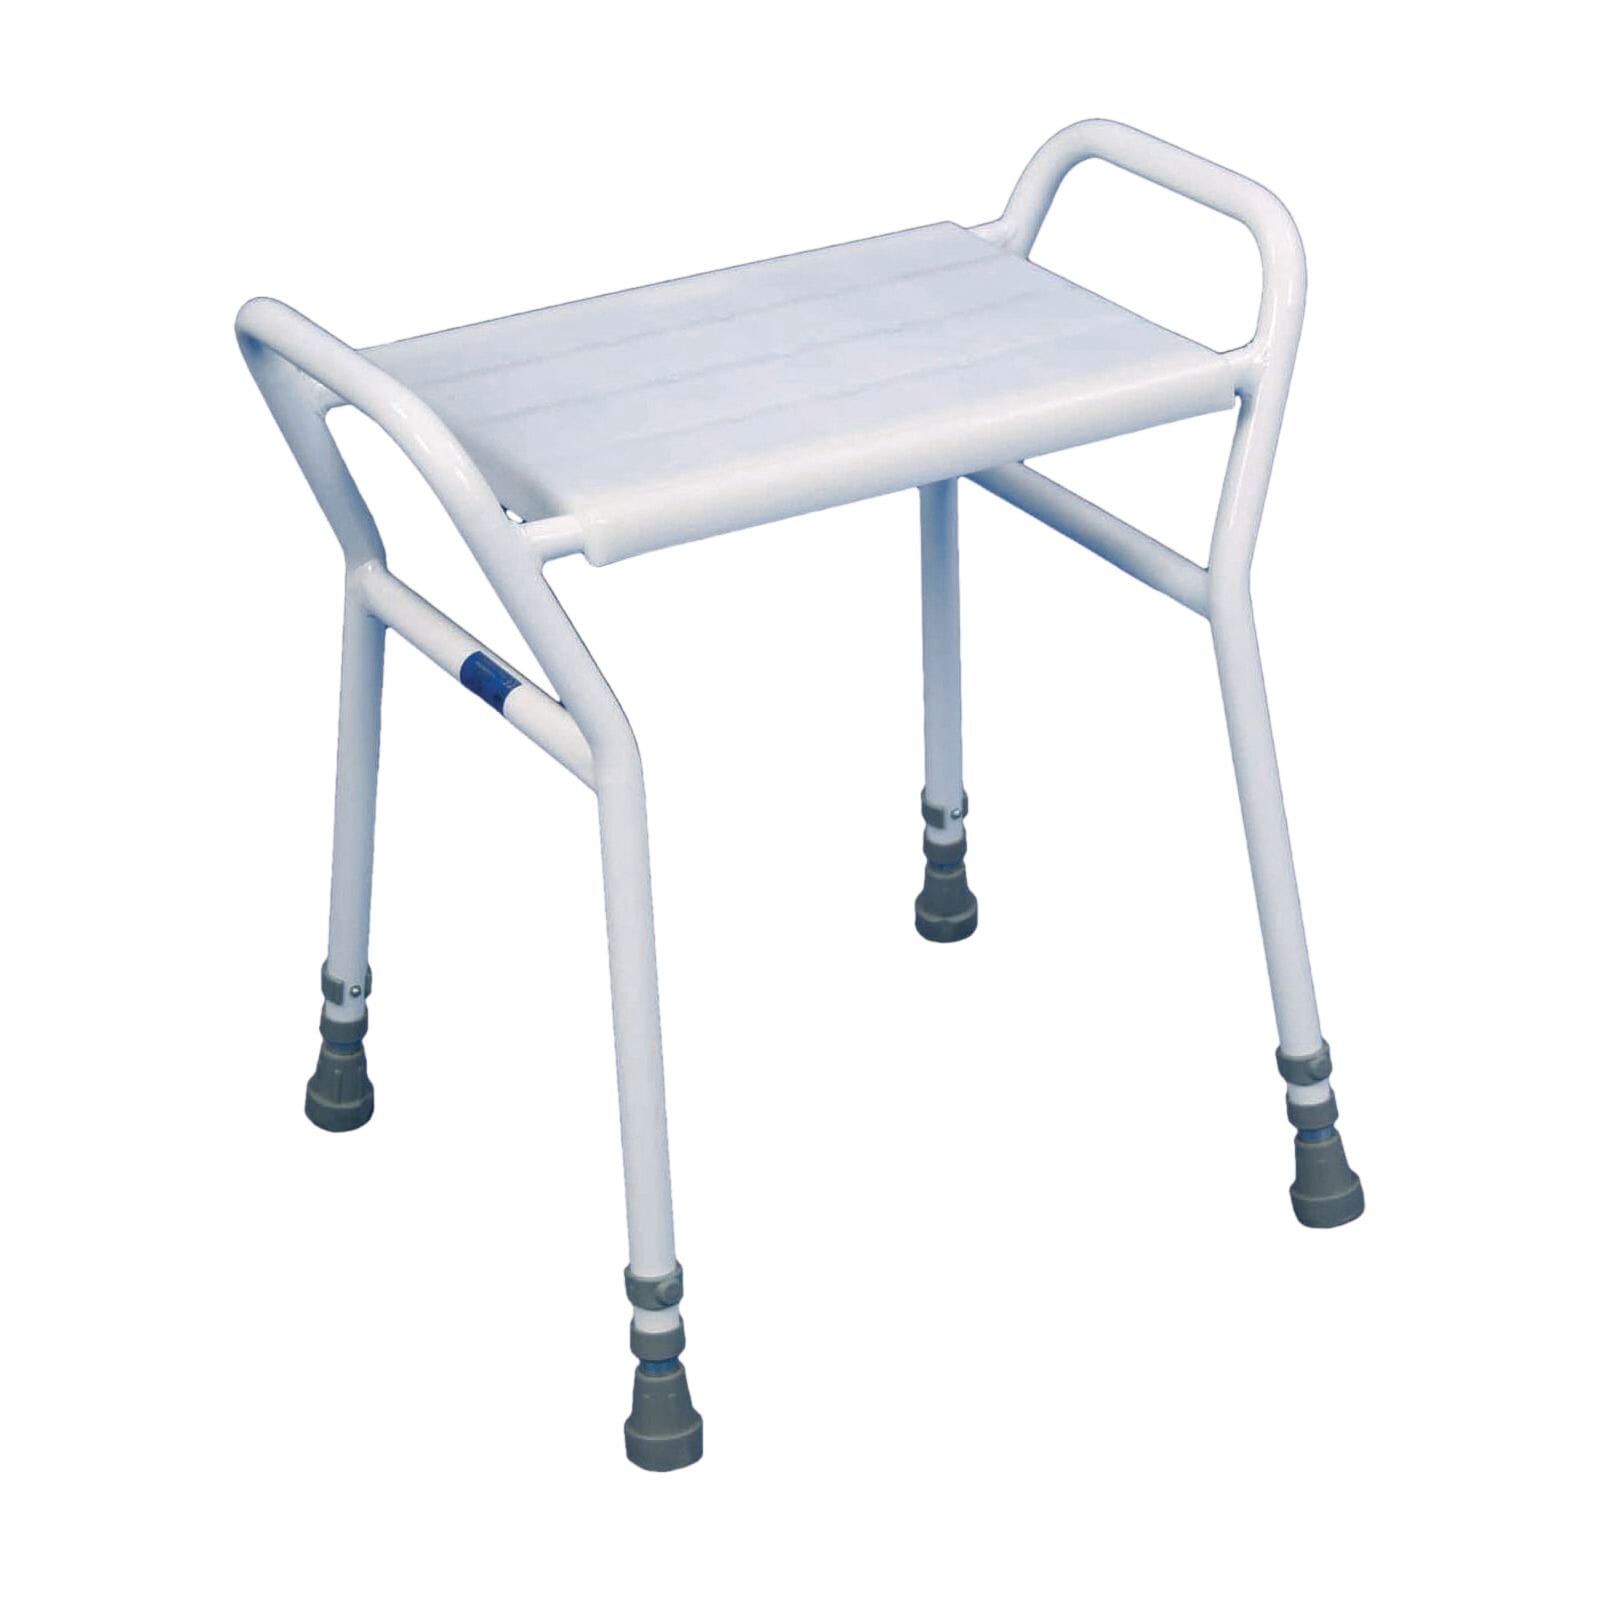 View Strood Shower Stool with AntiScratch Finish information